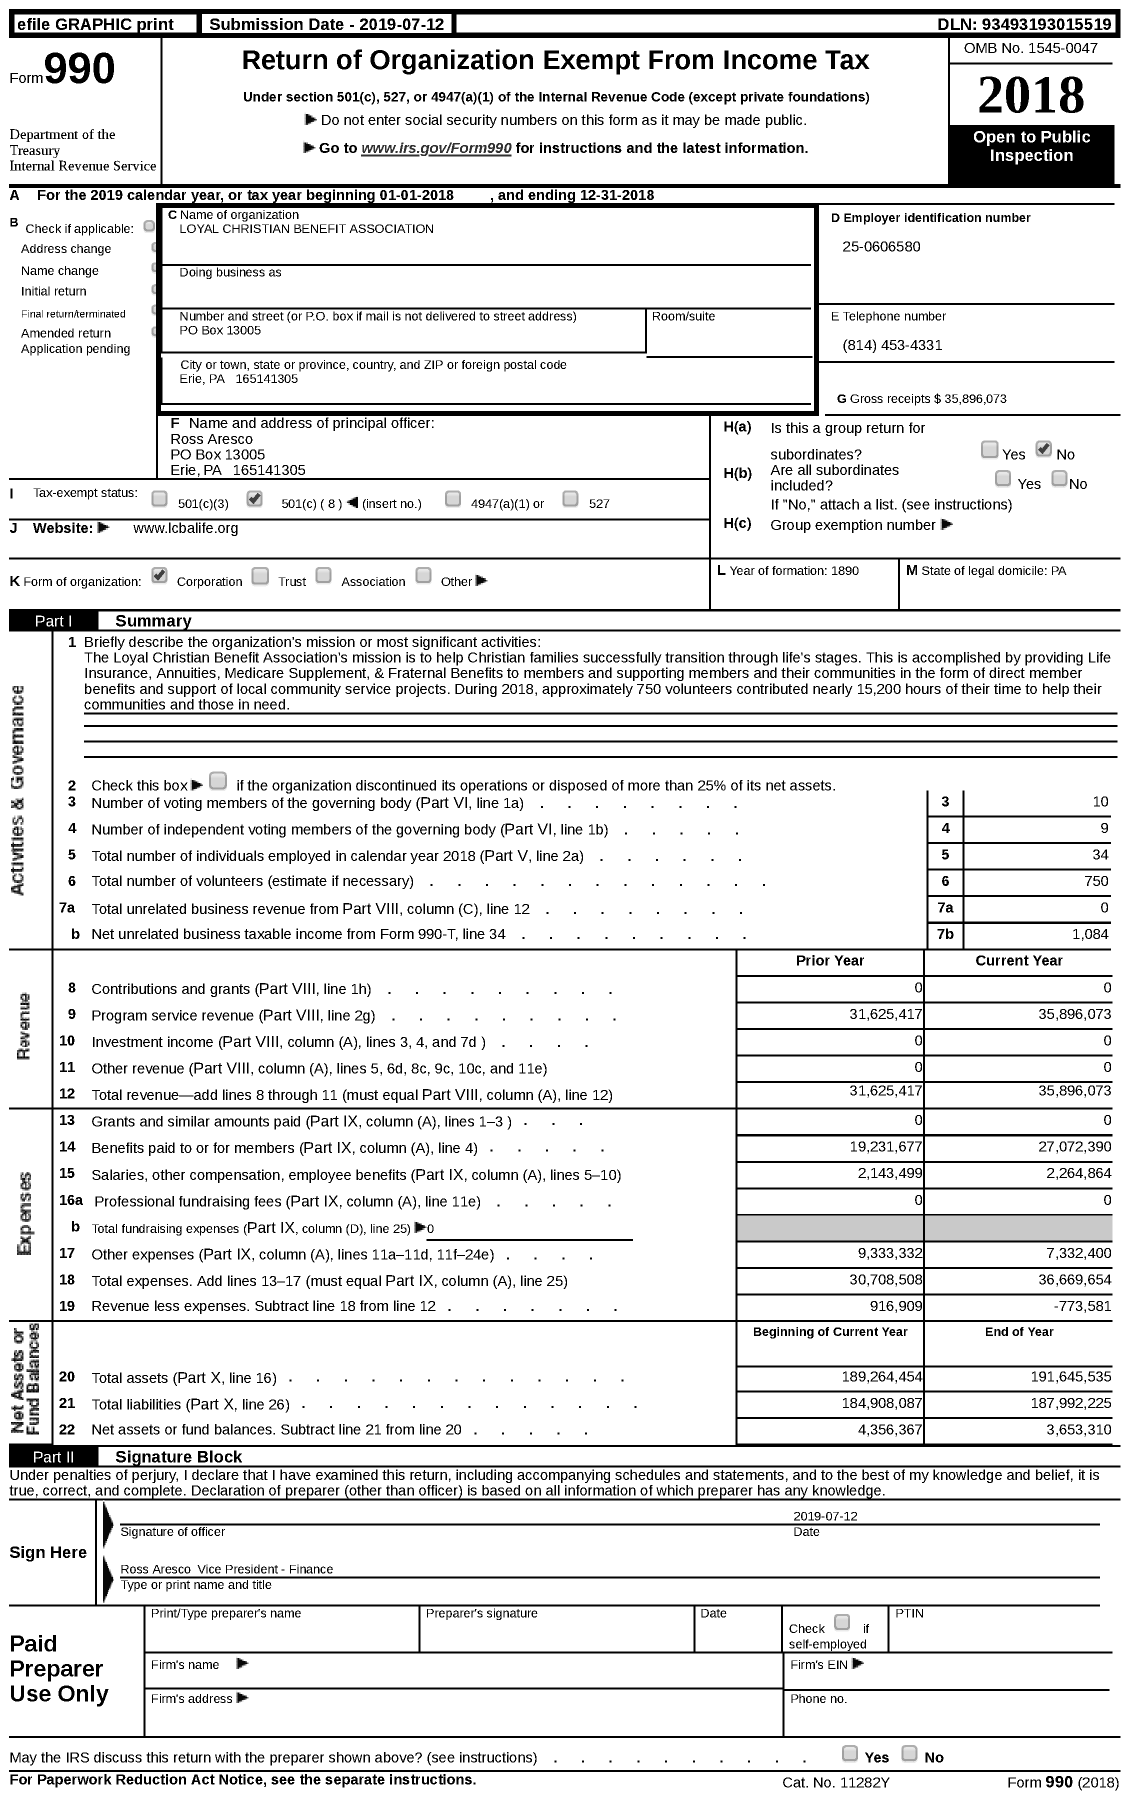 Image of first page of 2018 Form 990 for Loyal Christian Benefit Association